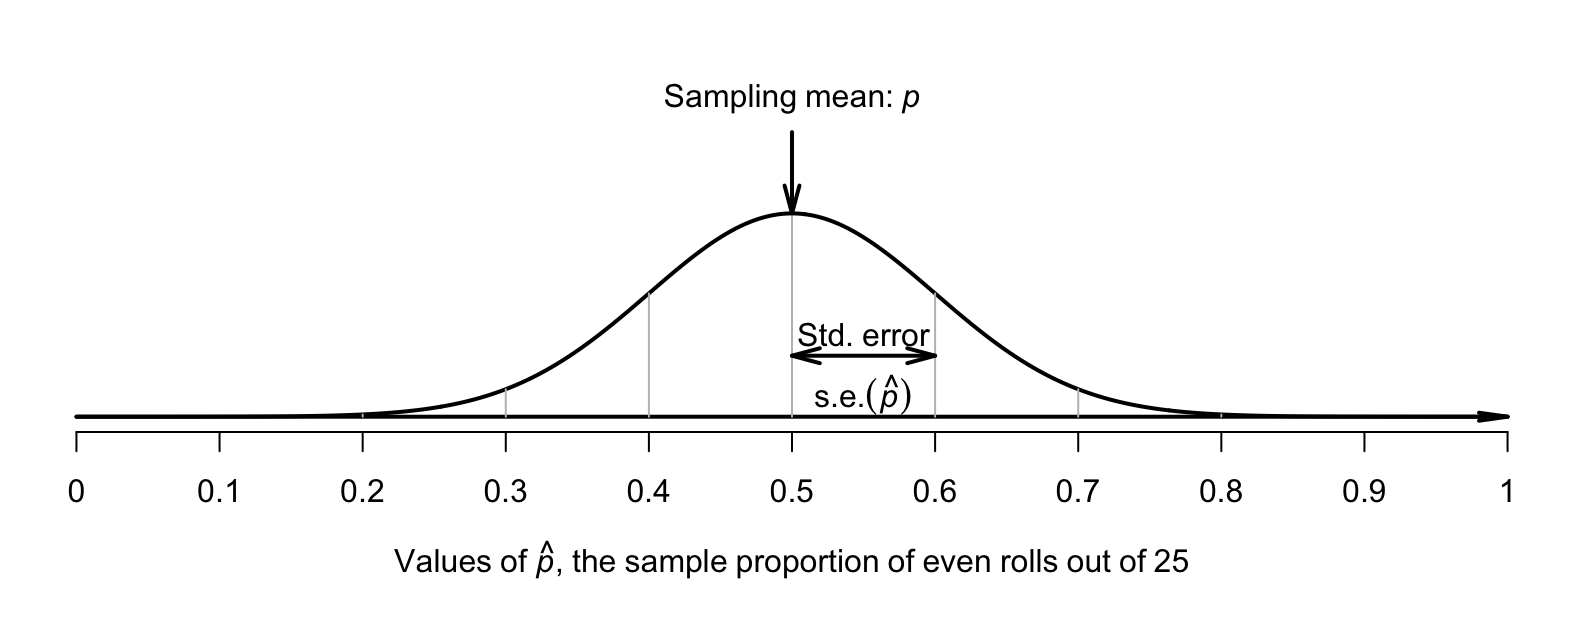 The normal distribution, showing a model of how the proportion of even rolls varies when a die is rolled $25$ times